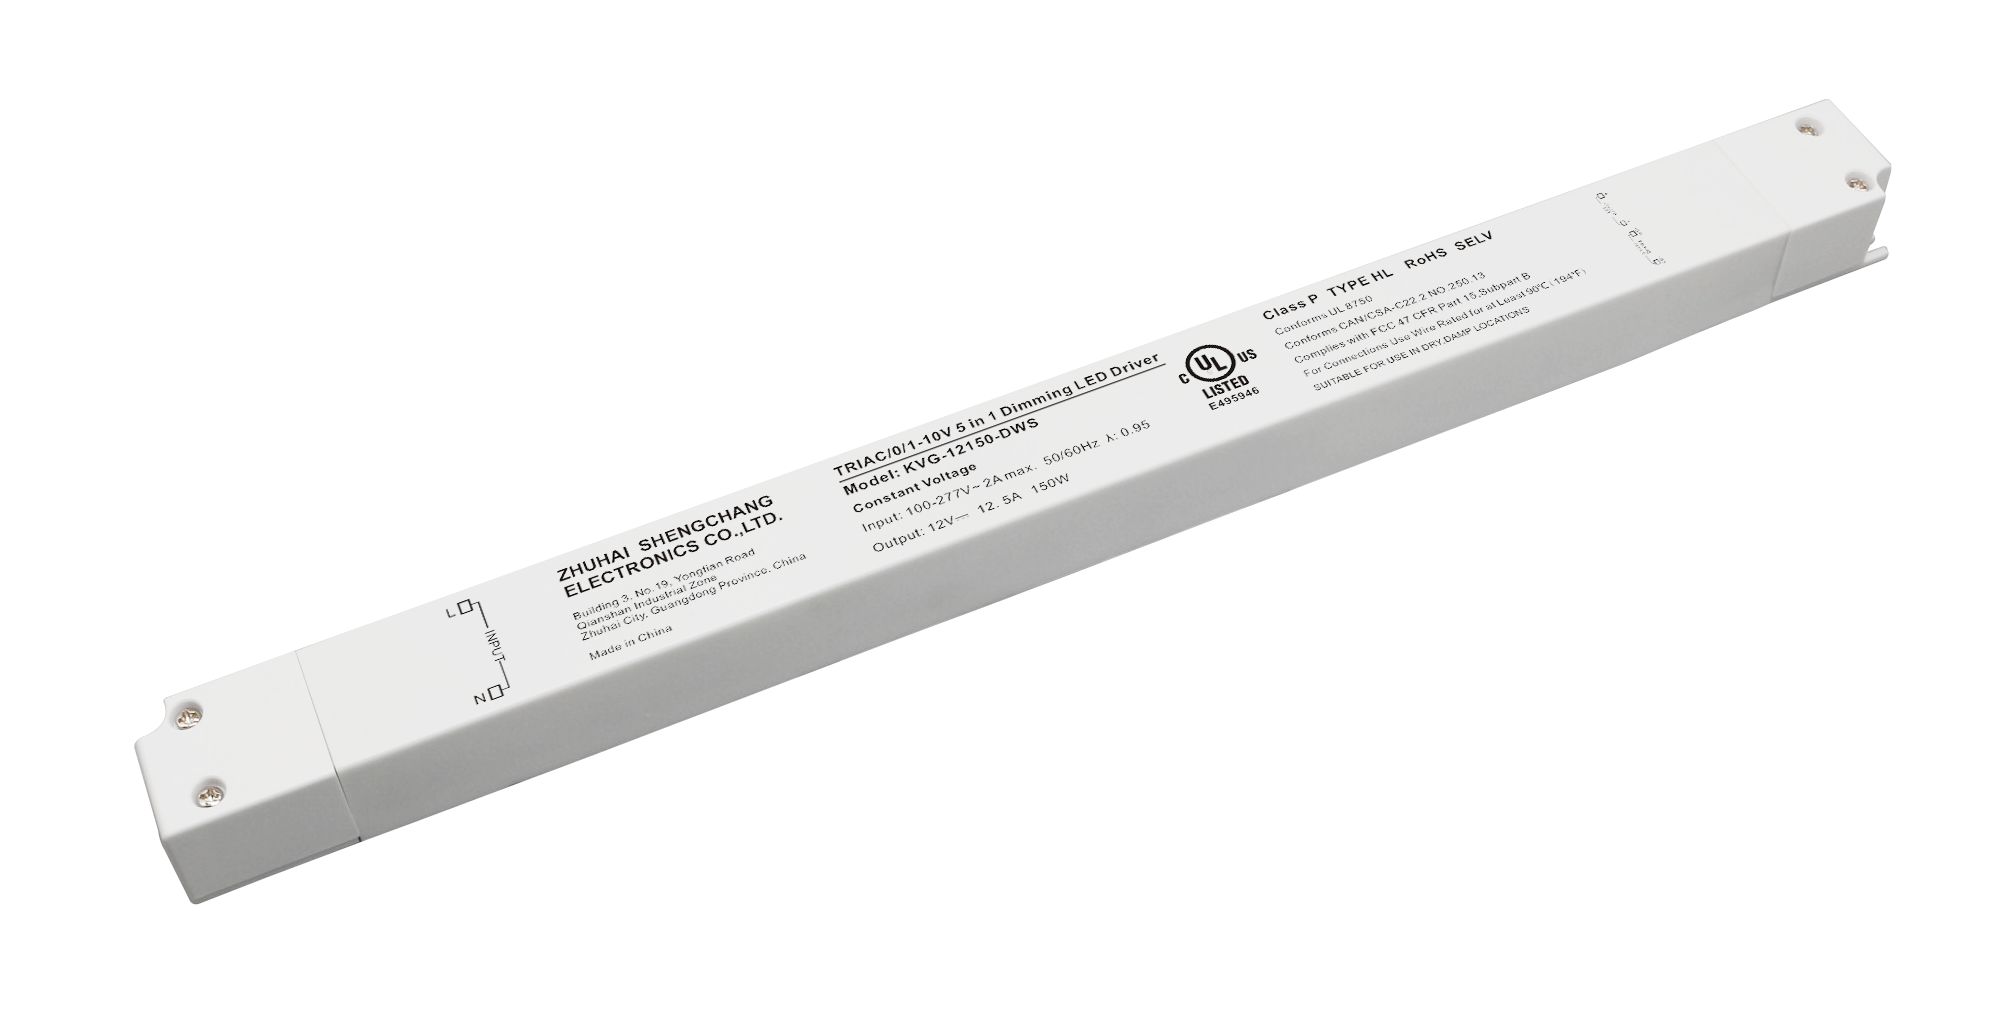 KVG-DWS Series 150W Constant Voltage Triac&0/1-10V Dimmable LED driver